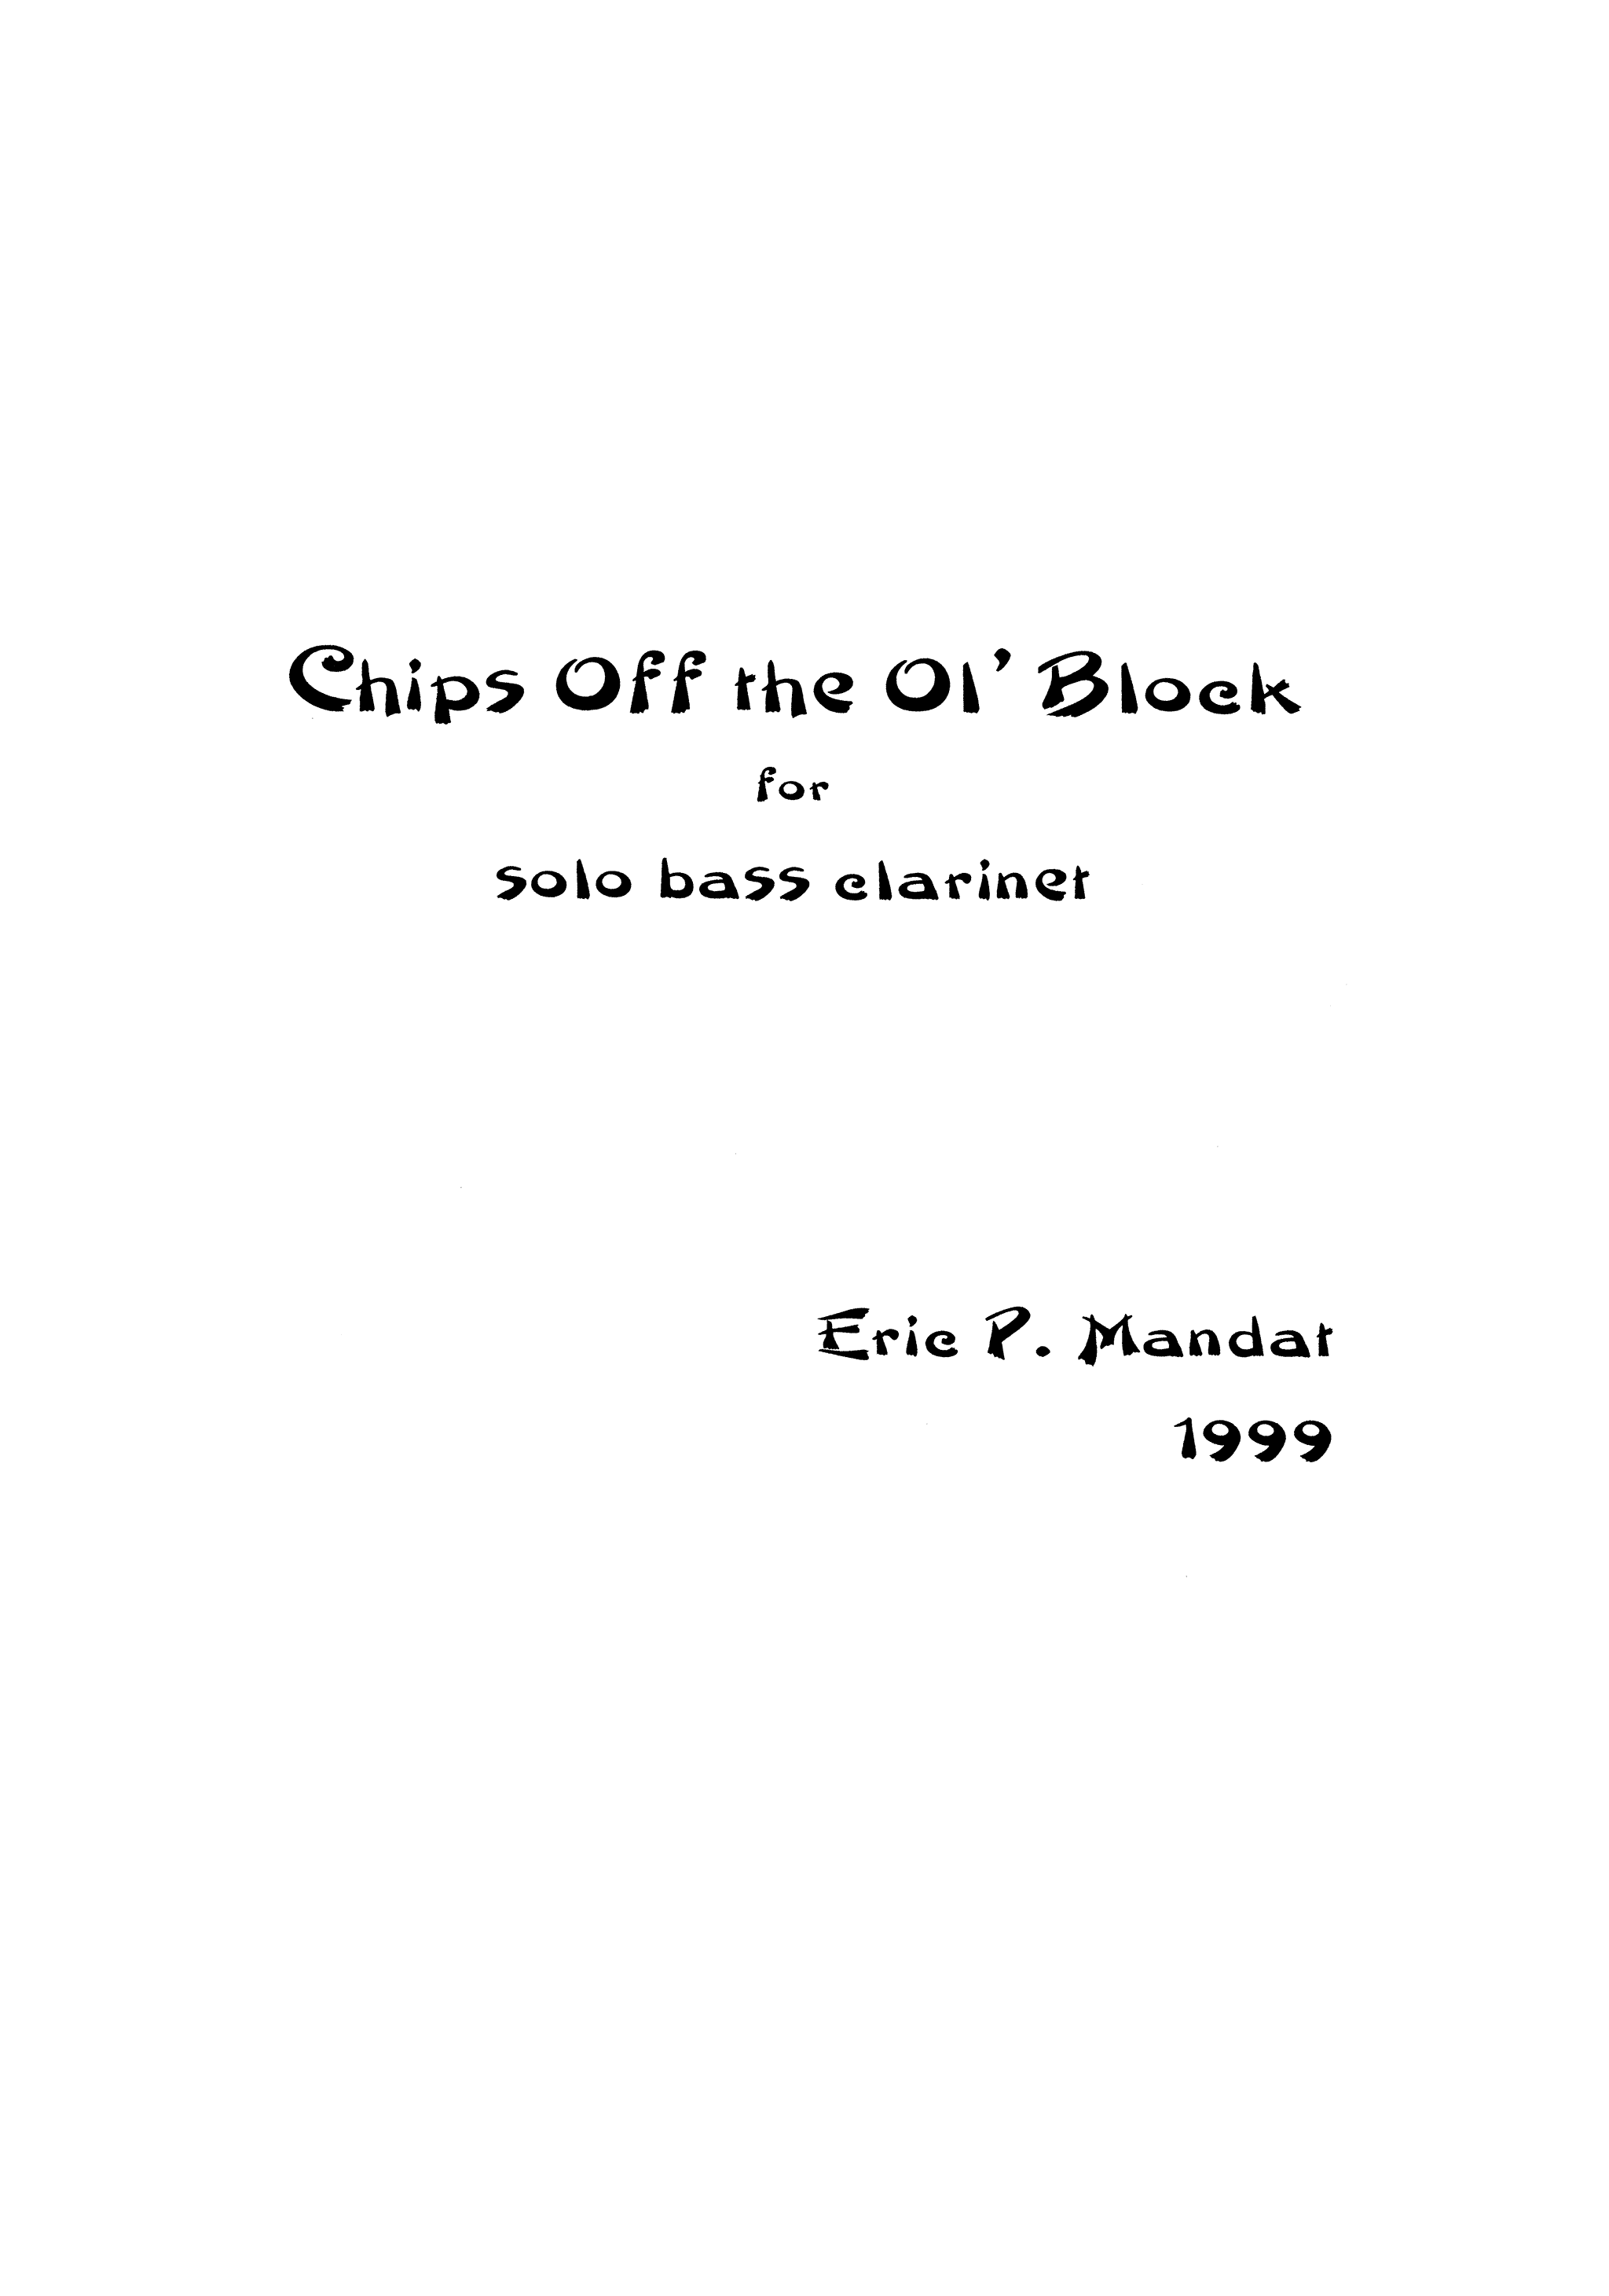 Mandat Chips Off the Ol’ Block Cover